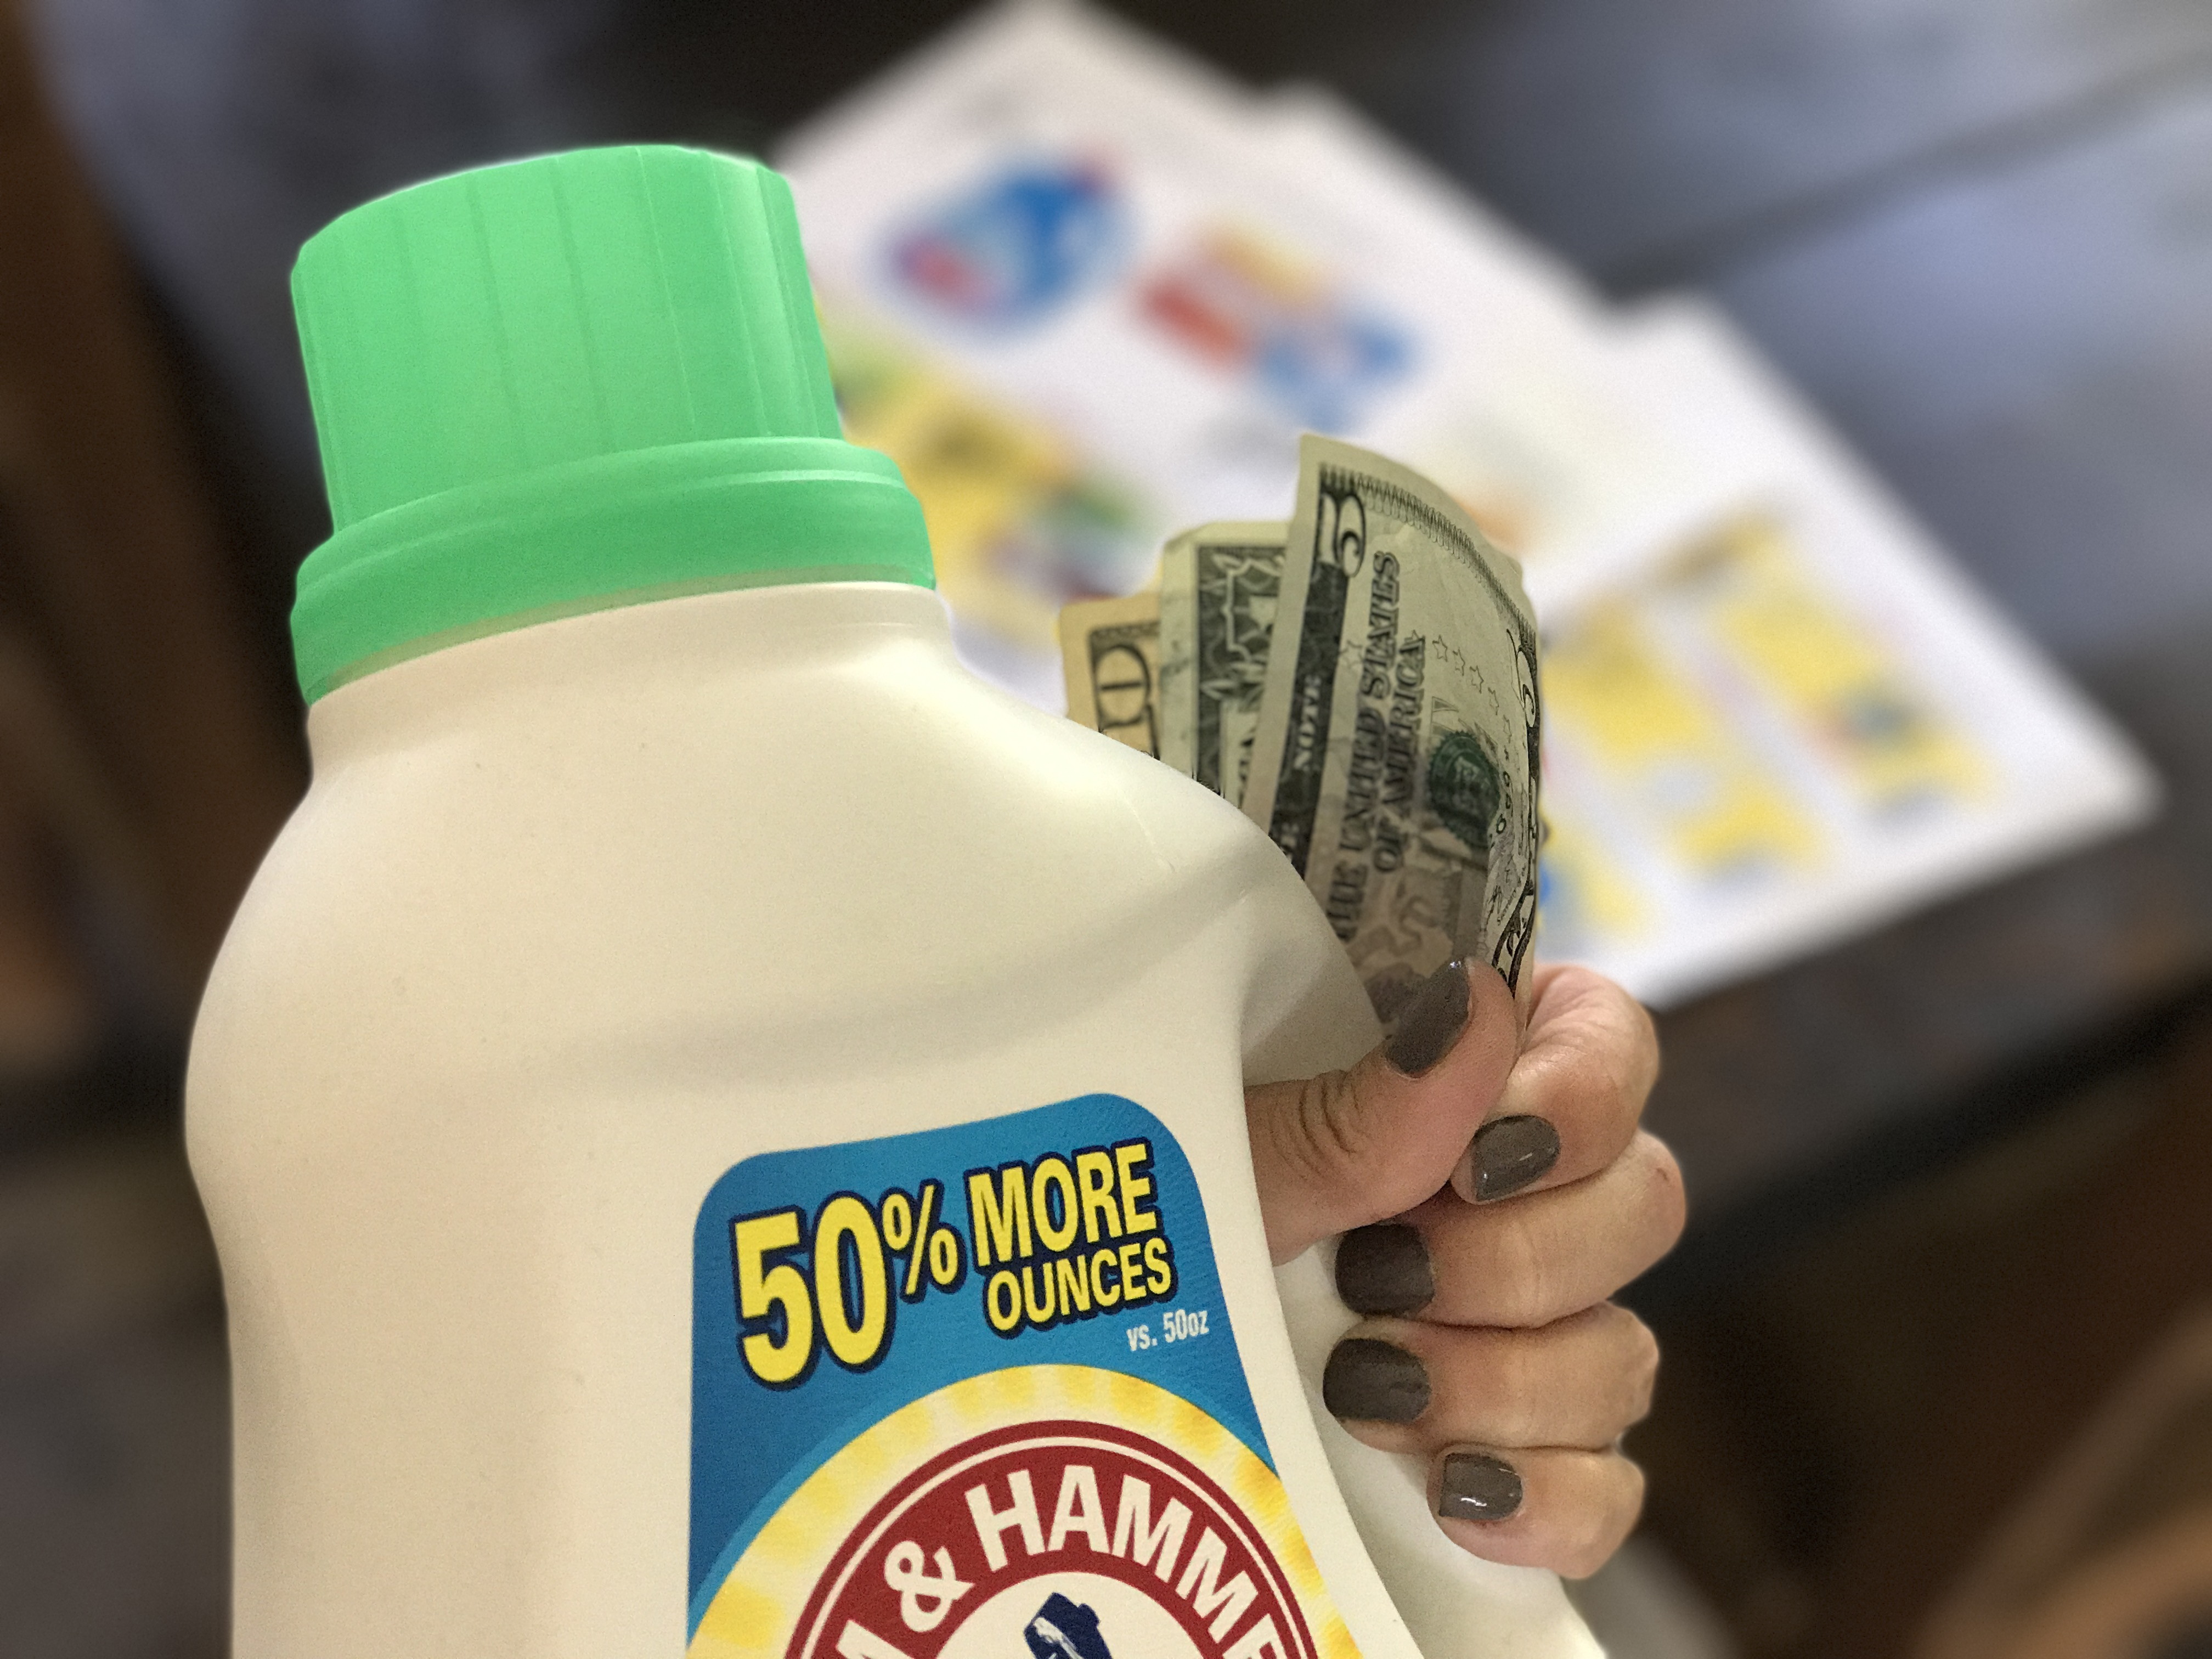 How To Never Pay Full Price For Laundry Detergent The Krazy Coupon - how to never pay full price for laundry detergent the krazy coupon lady